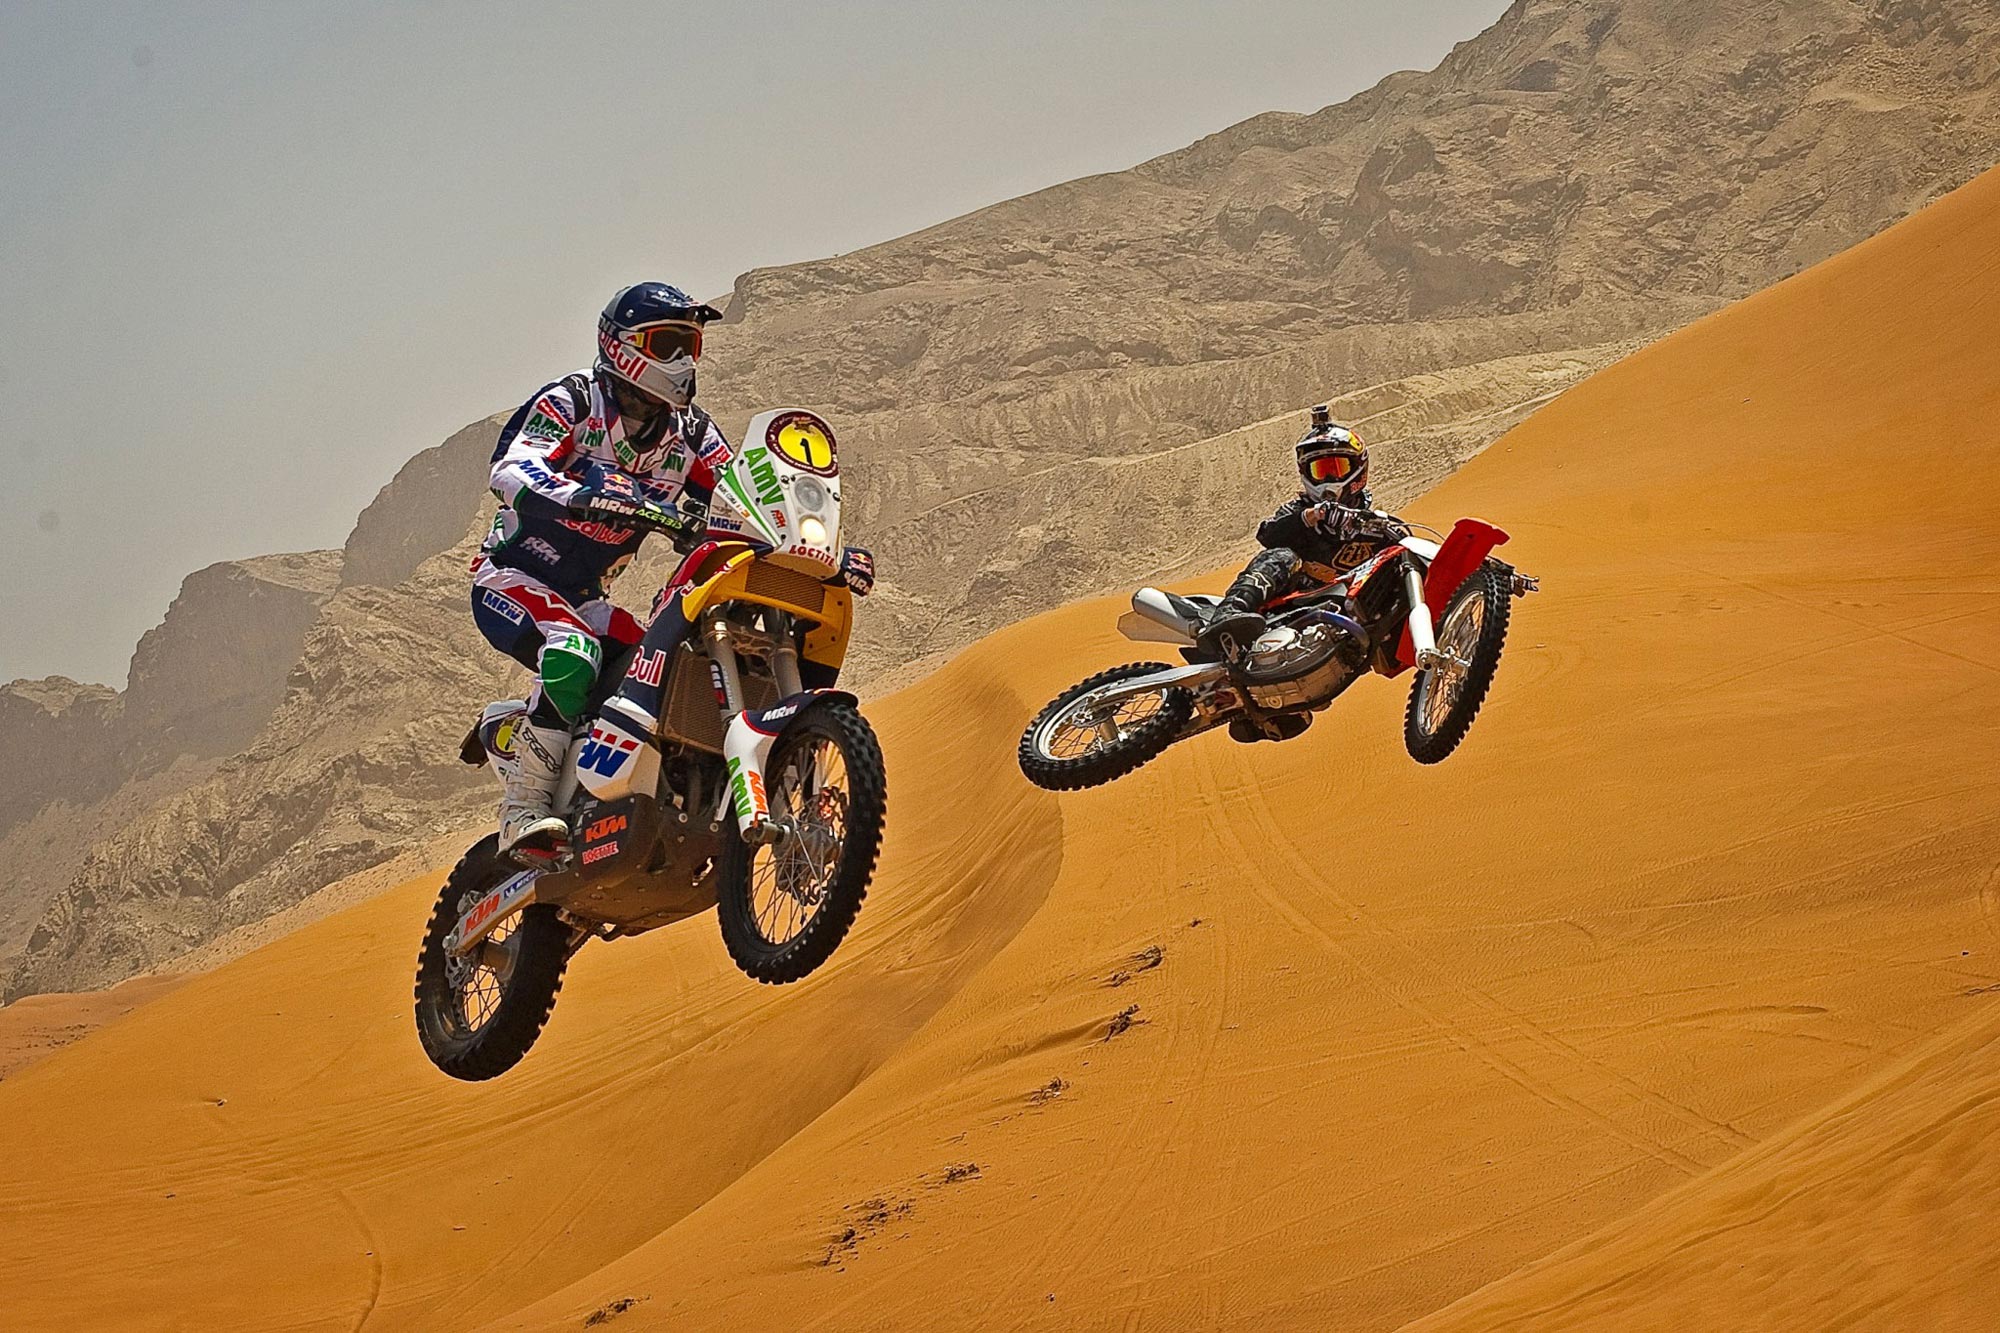 dirt bike movies on national geographic